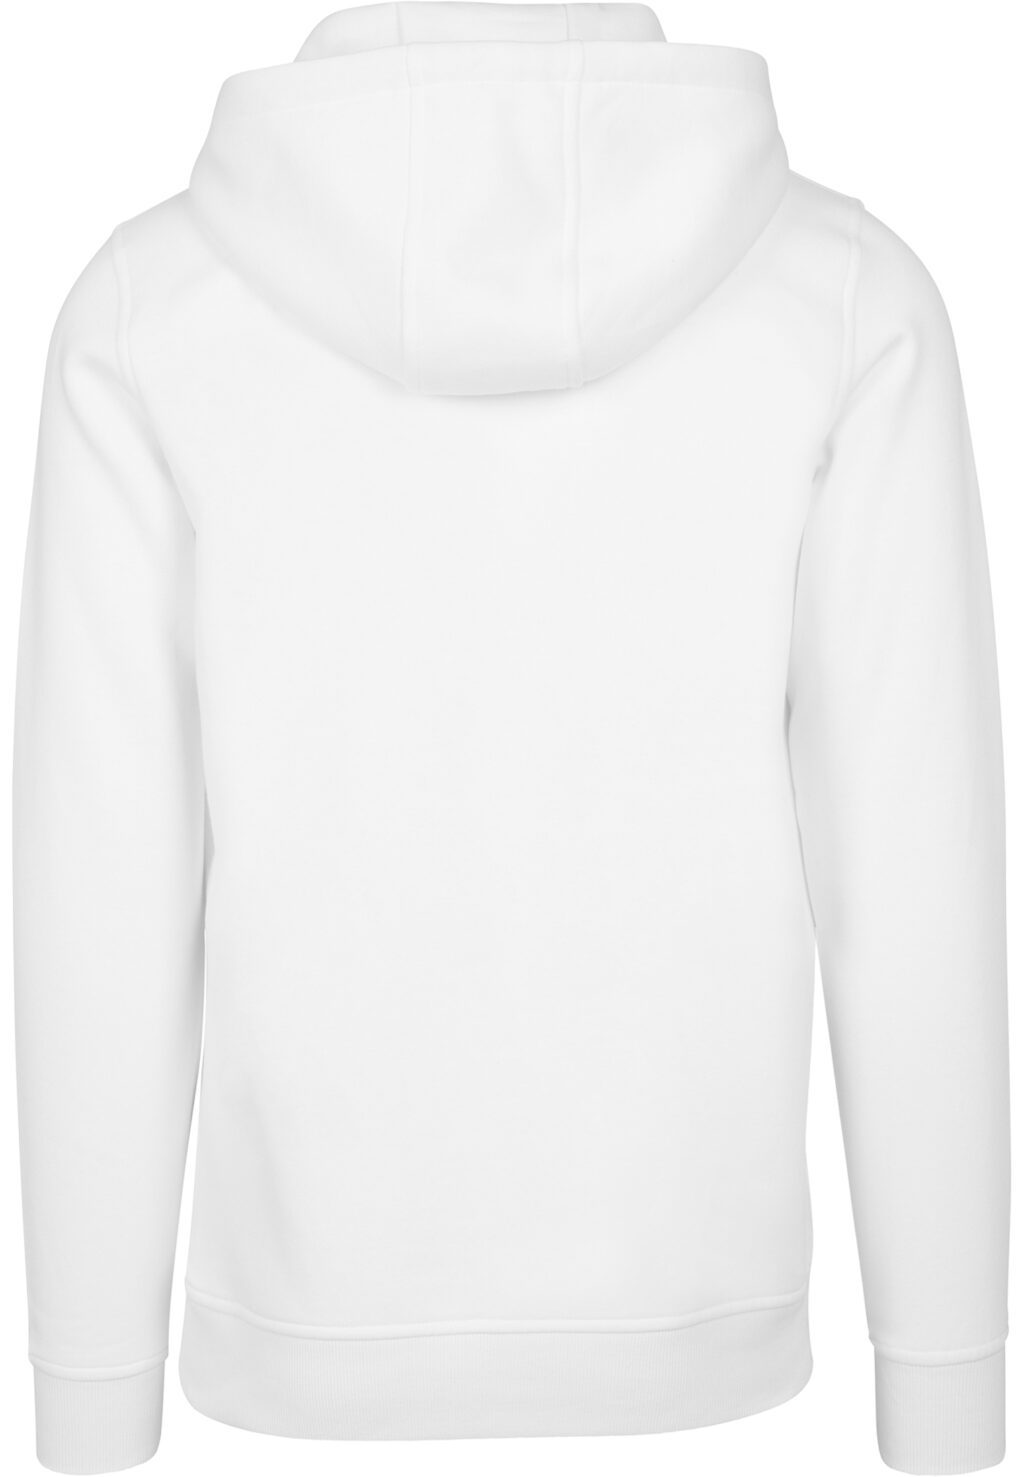 Out$ide Hoody white MT3044